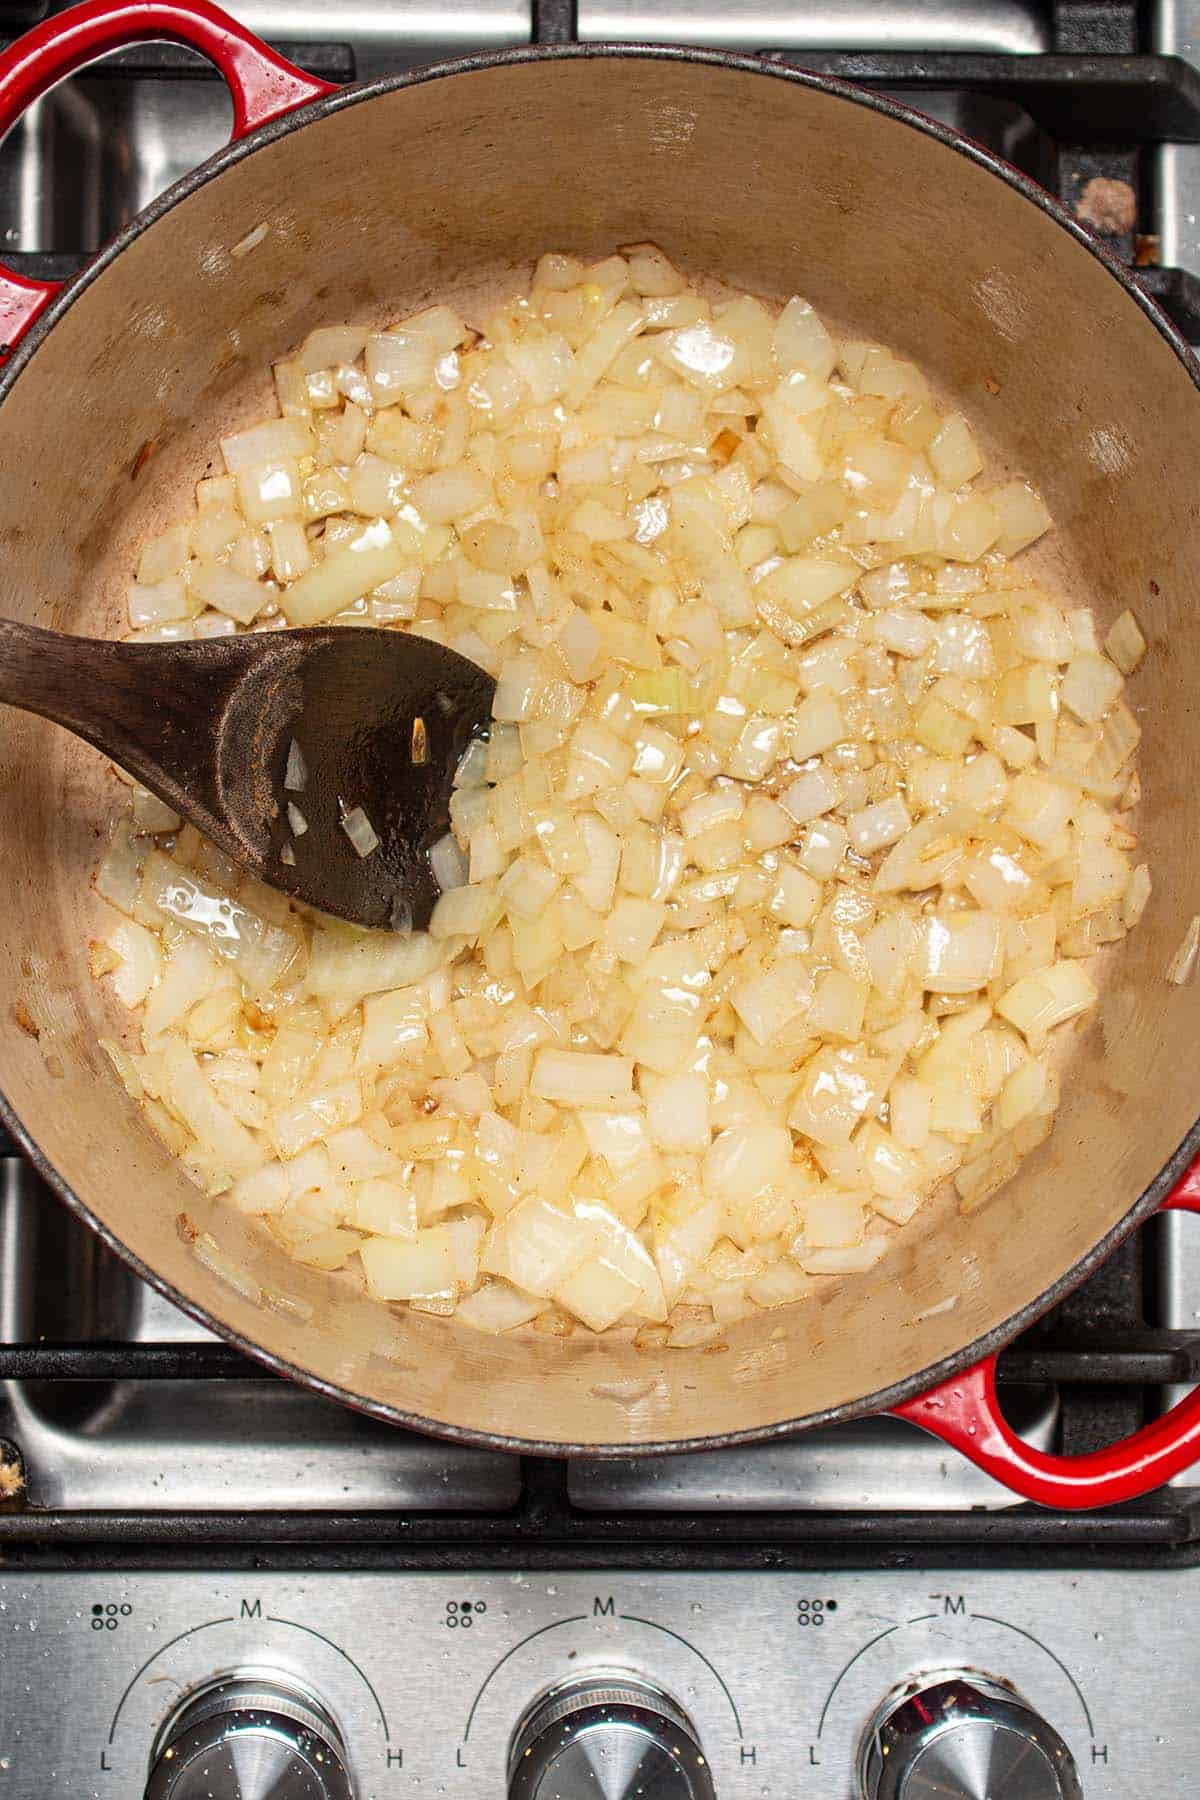 Onions sautéing in olive oil with a wooden spoon.